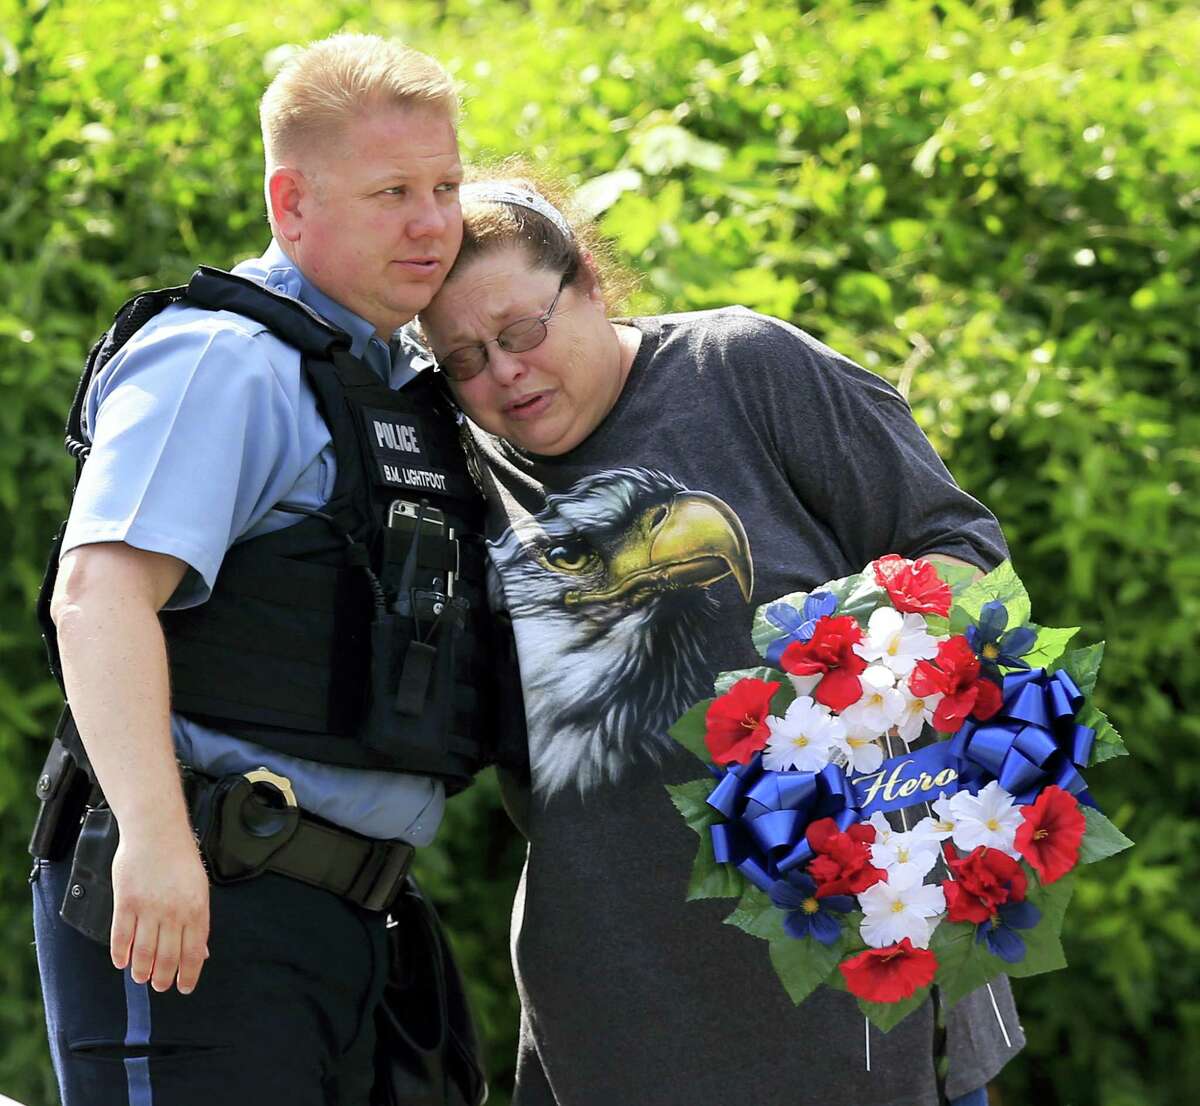 Kansas City, Kan., police officer Brad Lightfoot, left, consuls Susan Goble at the shooting scene of a police officer in Kansas City, Kan. on Tuesday. Goble knows the family of the fallen officer and hoped to place a wreath near the site of the shooting.